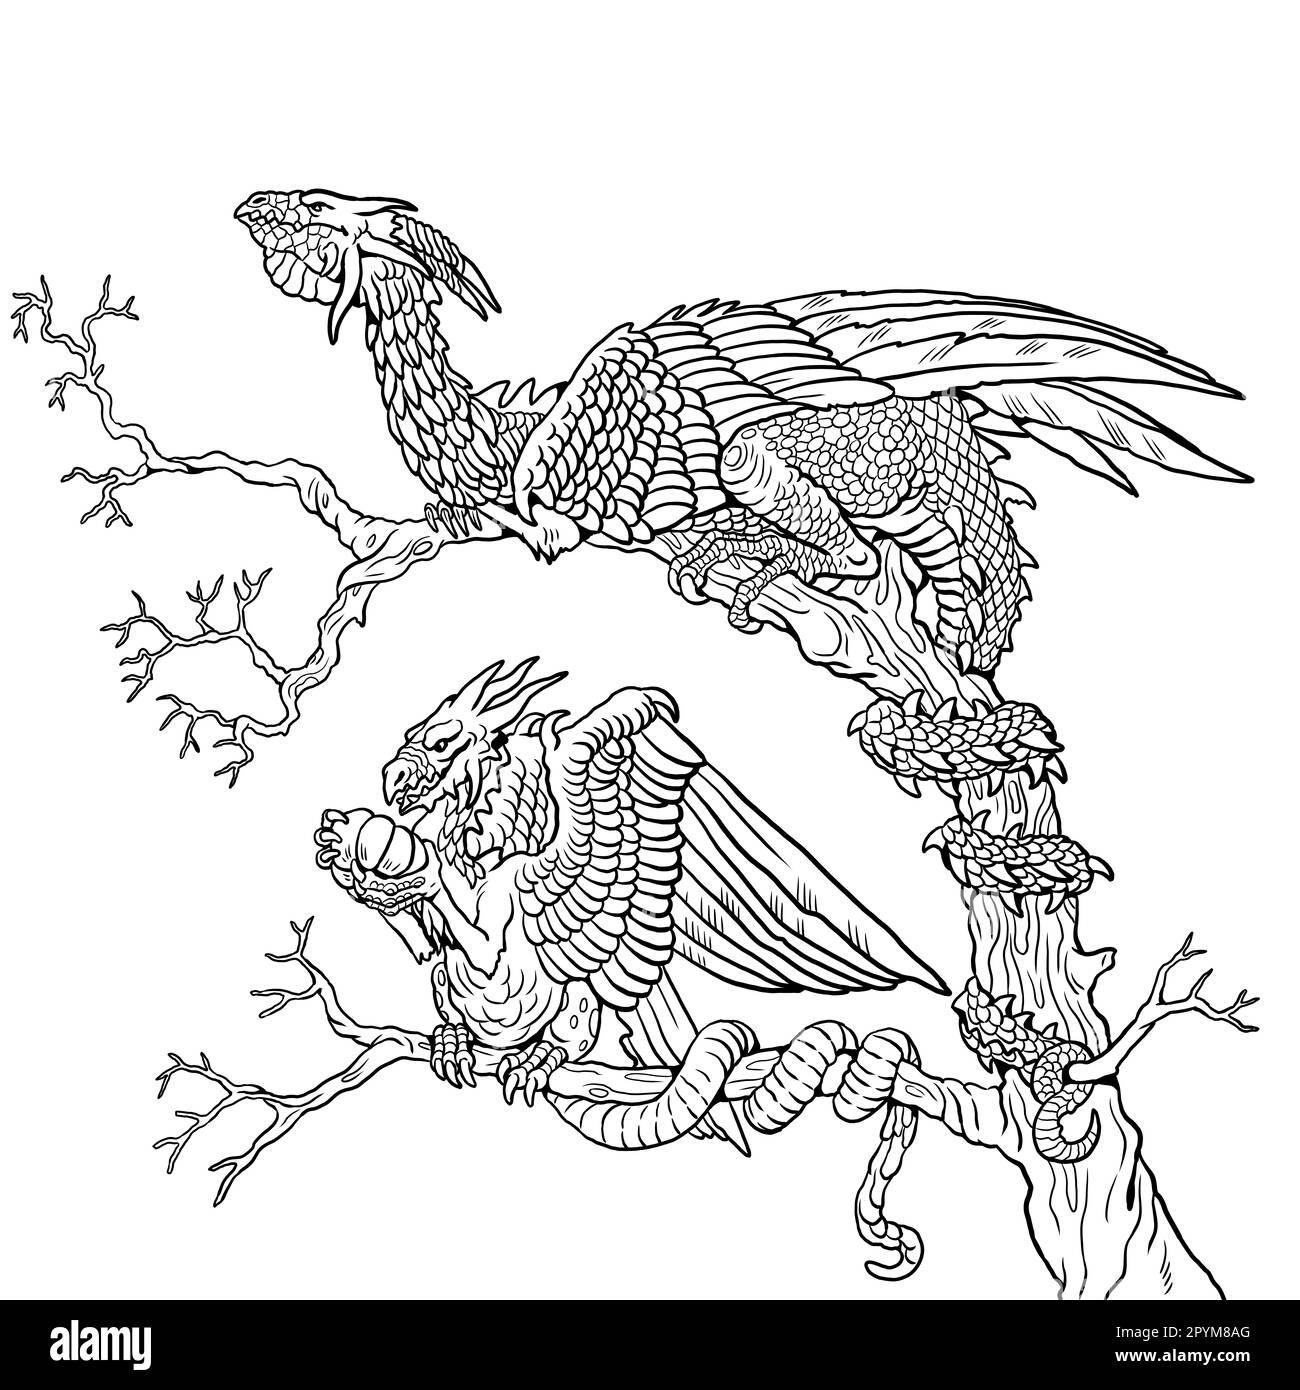 Dragon family coloring page. Fantasy illustration with mythical creature. Mama dragon with her child coloring sheet. Stock Photo